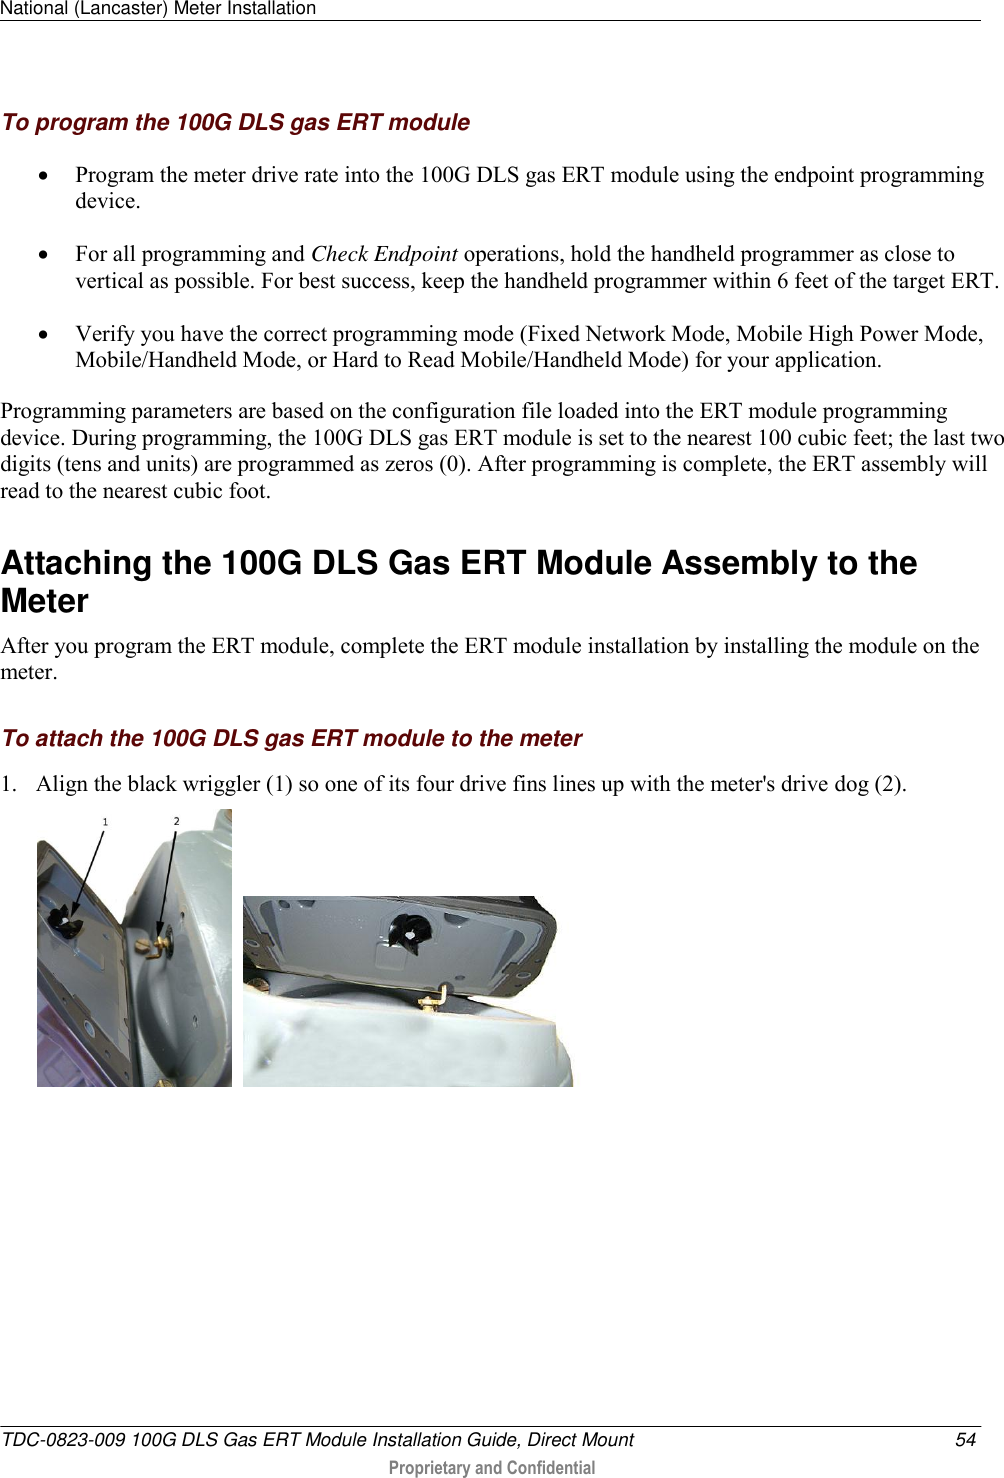 National (Lancaster) Meter Installation   TDC-0823-009 100G DLS Gas ERT Module Installation Guide, Direct Mount  54  Proprietary and Confidential    To program the 100G DLS gas ERT module  Program the meter drive rate into the 100G DLS gas ERT module using the endpoint programming device.   For all programming and Check Endpoint operations, hold the handheld programmer as close to vertical as possible. For best success, keep the handheld programmer within 6 feet of the target ERT.  Verify you have the correct programming mode (Fixed Network Mode, Mobile High Power Mode, Mobile/Handheld Mode, or Hard to Read Mobile/Handheld Mode) for your application.  Programming parameters are based on the configuration file loaded into the ERT module programming device. During programming, the 100G DLS gas ERT module is set to the nearest 100 cubic feet; the last two digits (tens and units) are programmed as zeros (0). After programming is complete, the ERT assembly will read to the nearest cubic foot.   Attaching the 100G DLS Gas ERT Module Assembly to the Meter After you program the ERT module, complete the ERT module installation by installing the module on the meter.   To attach the 100G DLS gas ERT module to the meter 1. Align the black wriggler (1) so one of its four drive fins lines up with the meter&apos;s drive dog (2).      